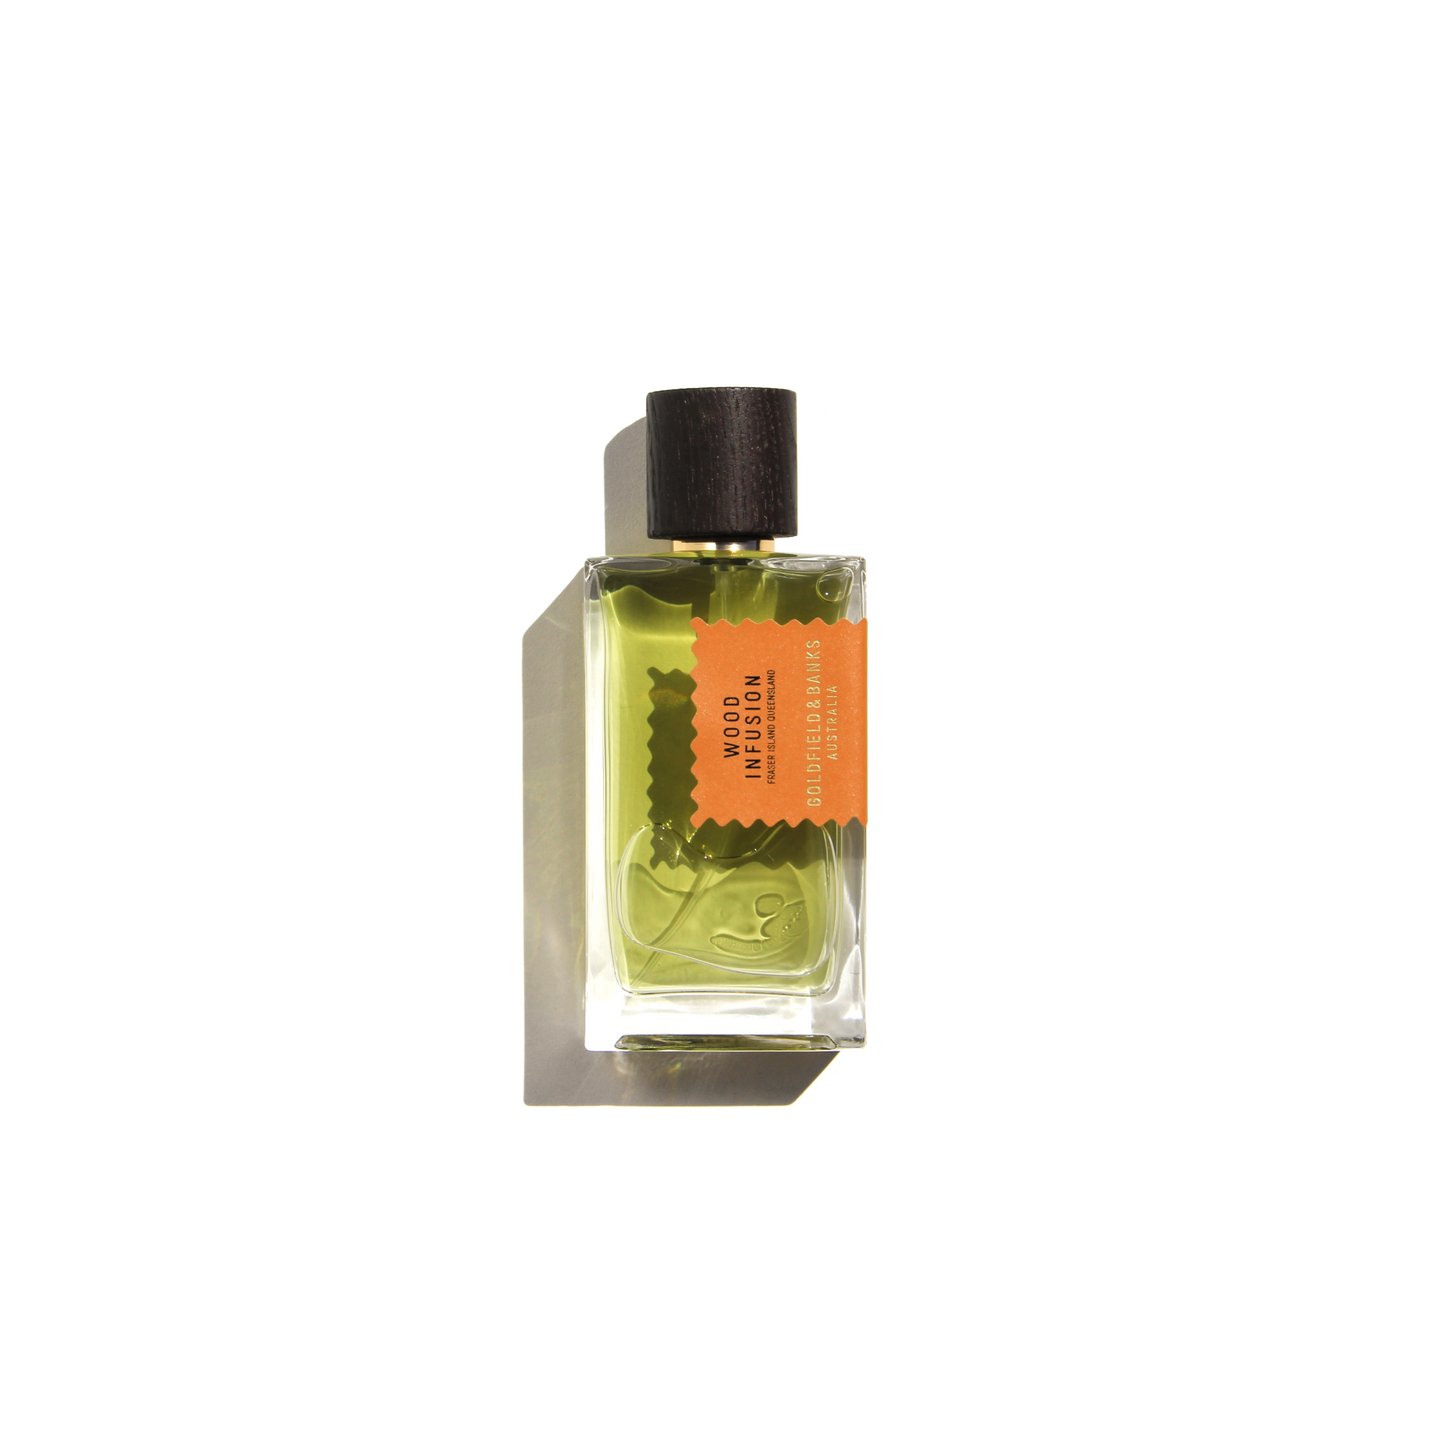 Wood Infusion 3.4oz Perfume Concentrate – So Avant Garde